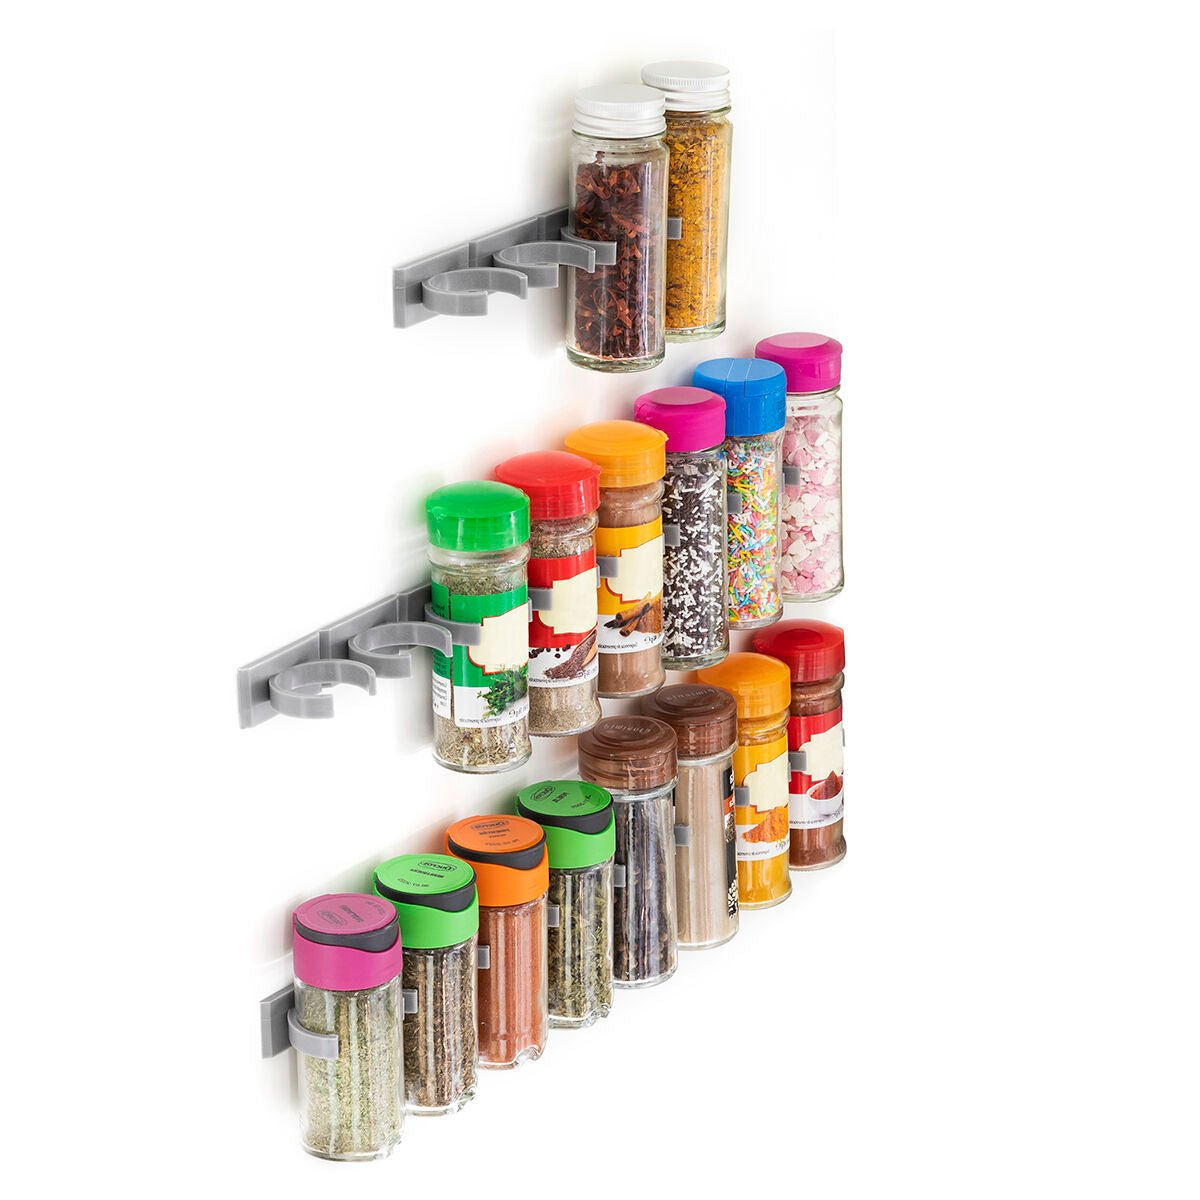 Adhesive and Divisible Spice Organiser Jarlock x20 InnovaGoods - WM24 Store